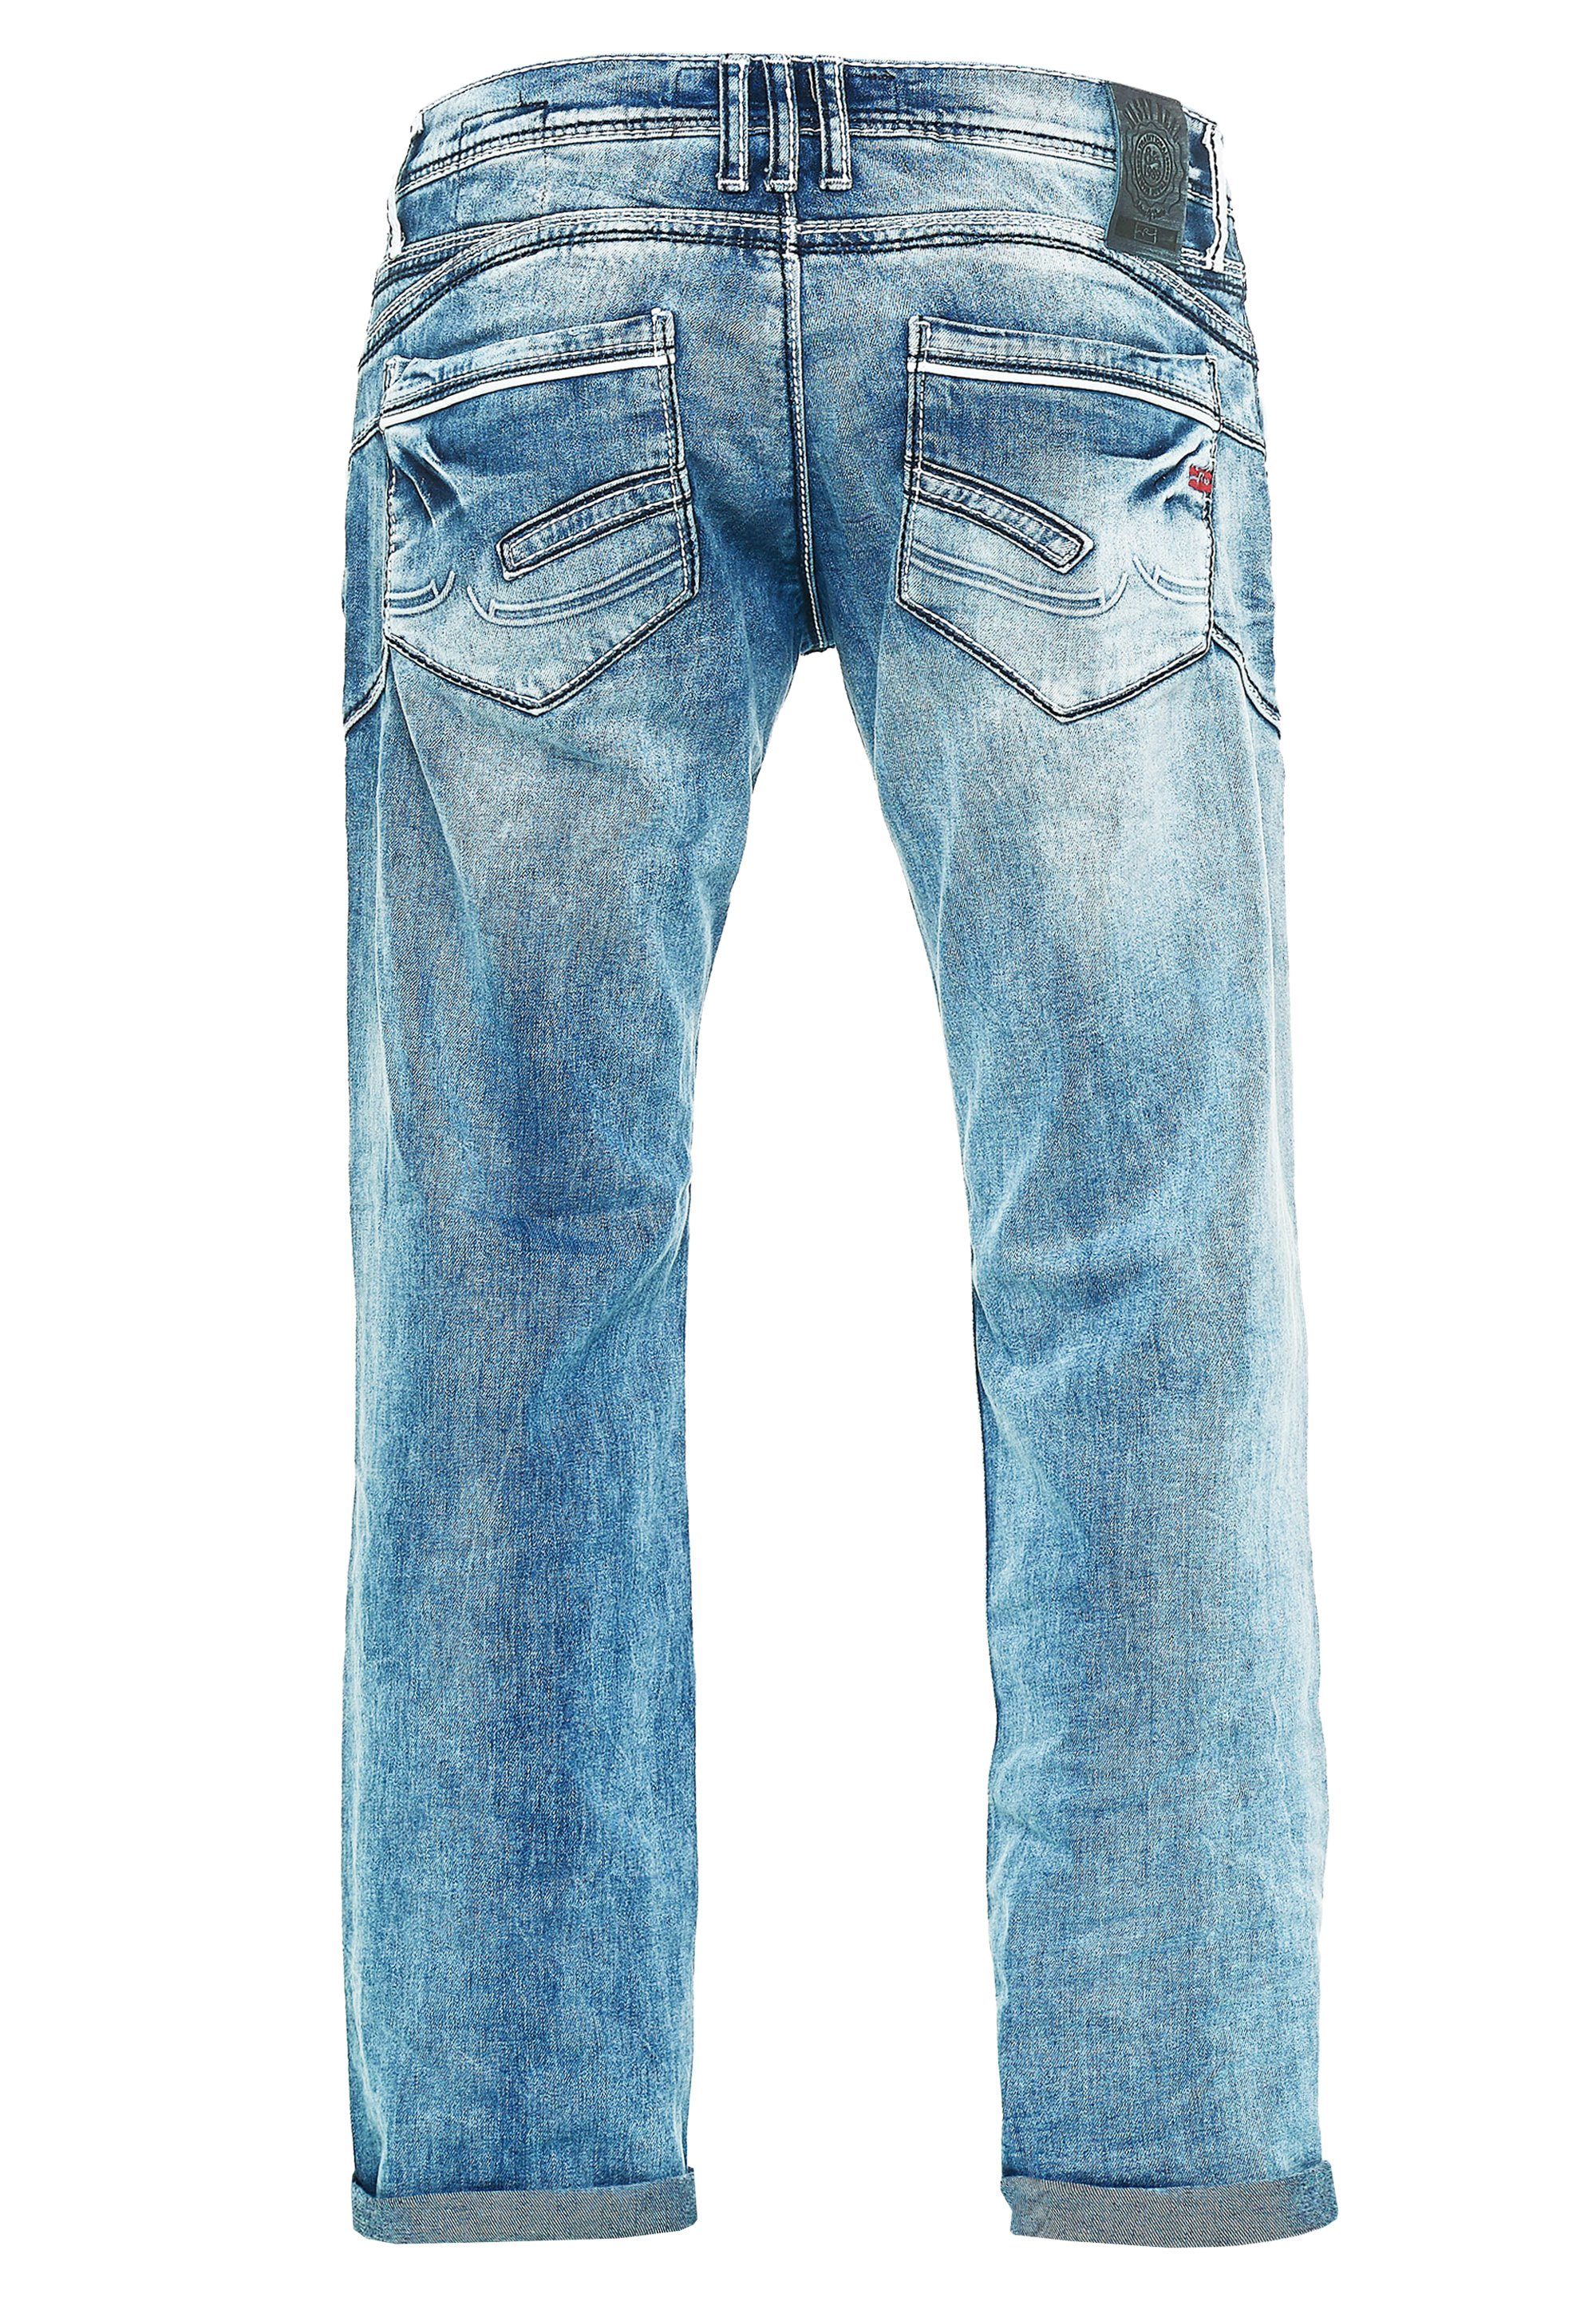 Waschung Jeans Neal Bequeme cooler mit Rusty